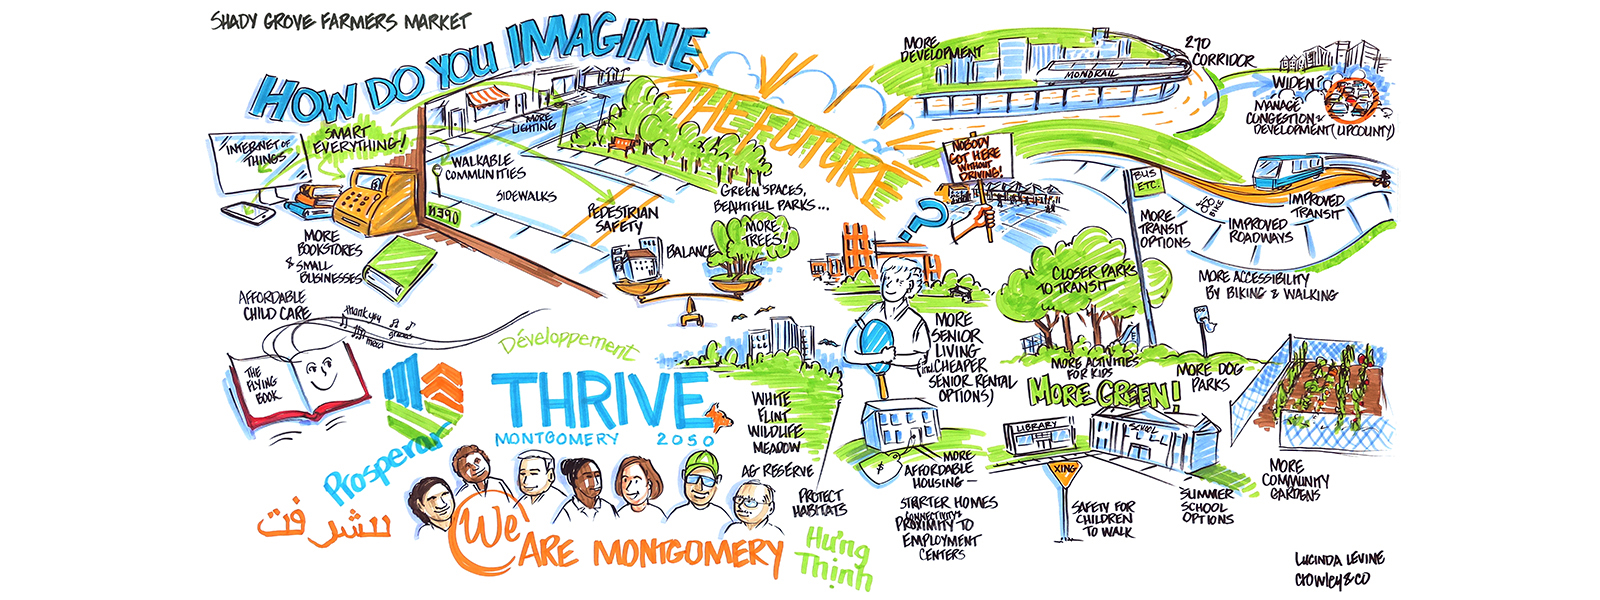 Graphic recording of June 26 Thrive Week event at Shady Grove Farmers Market